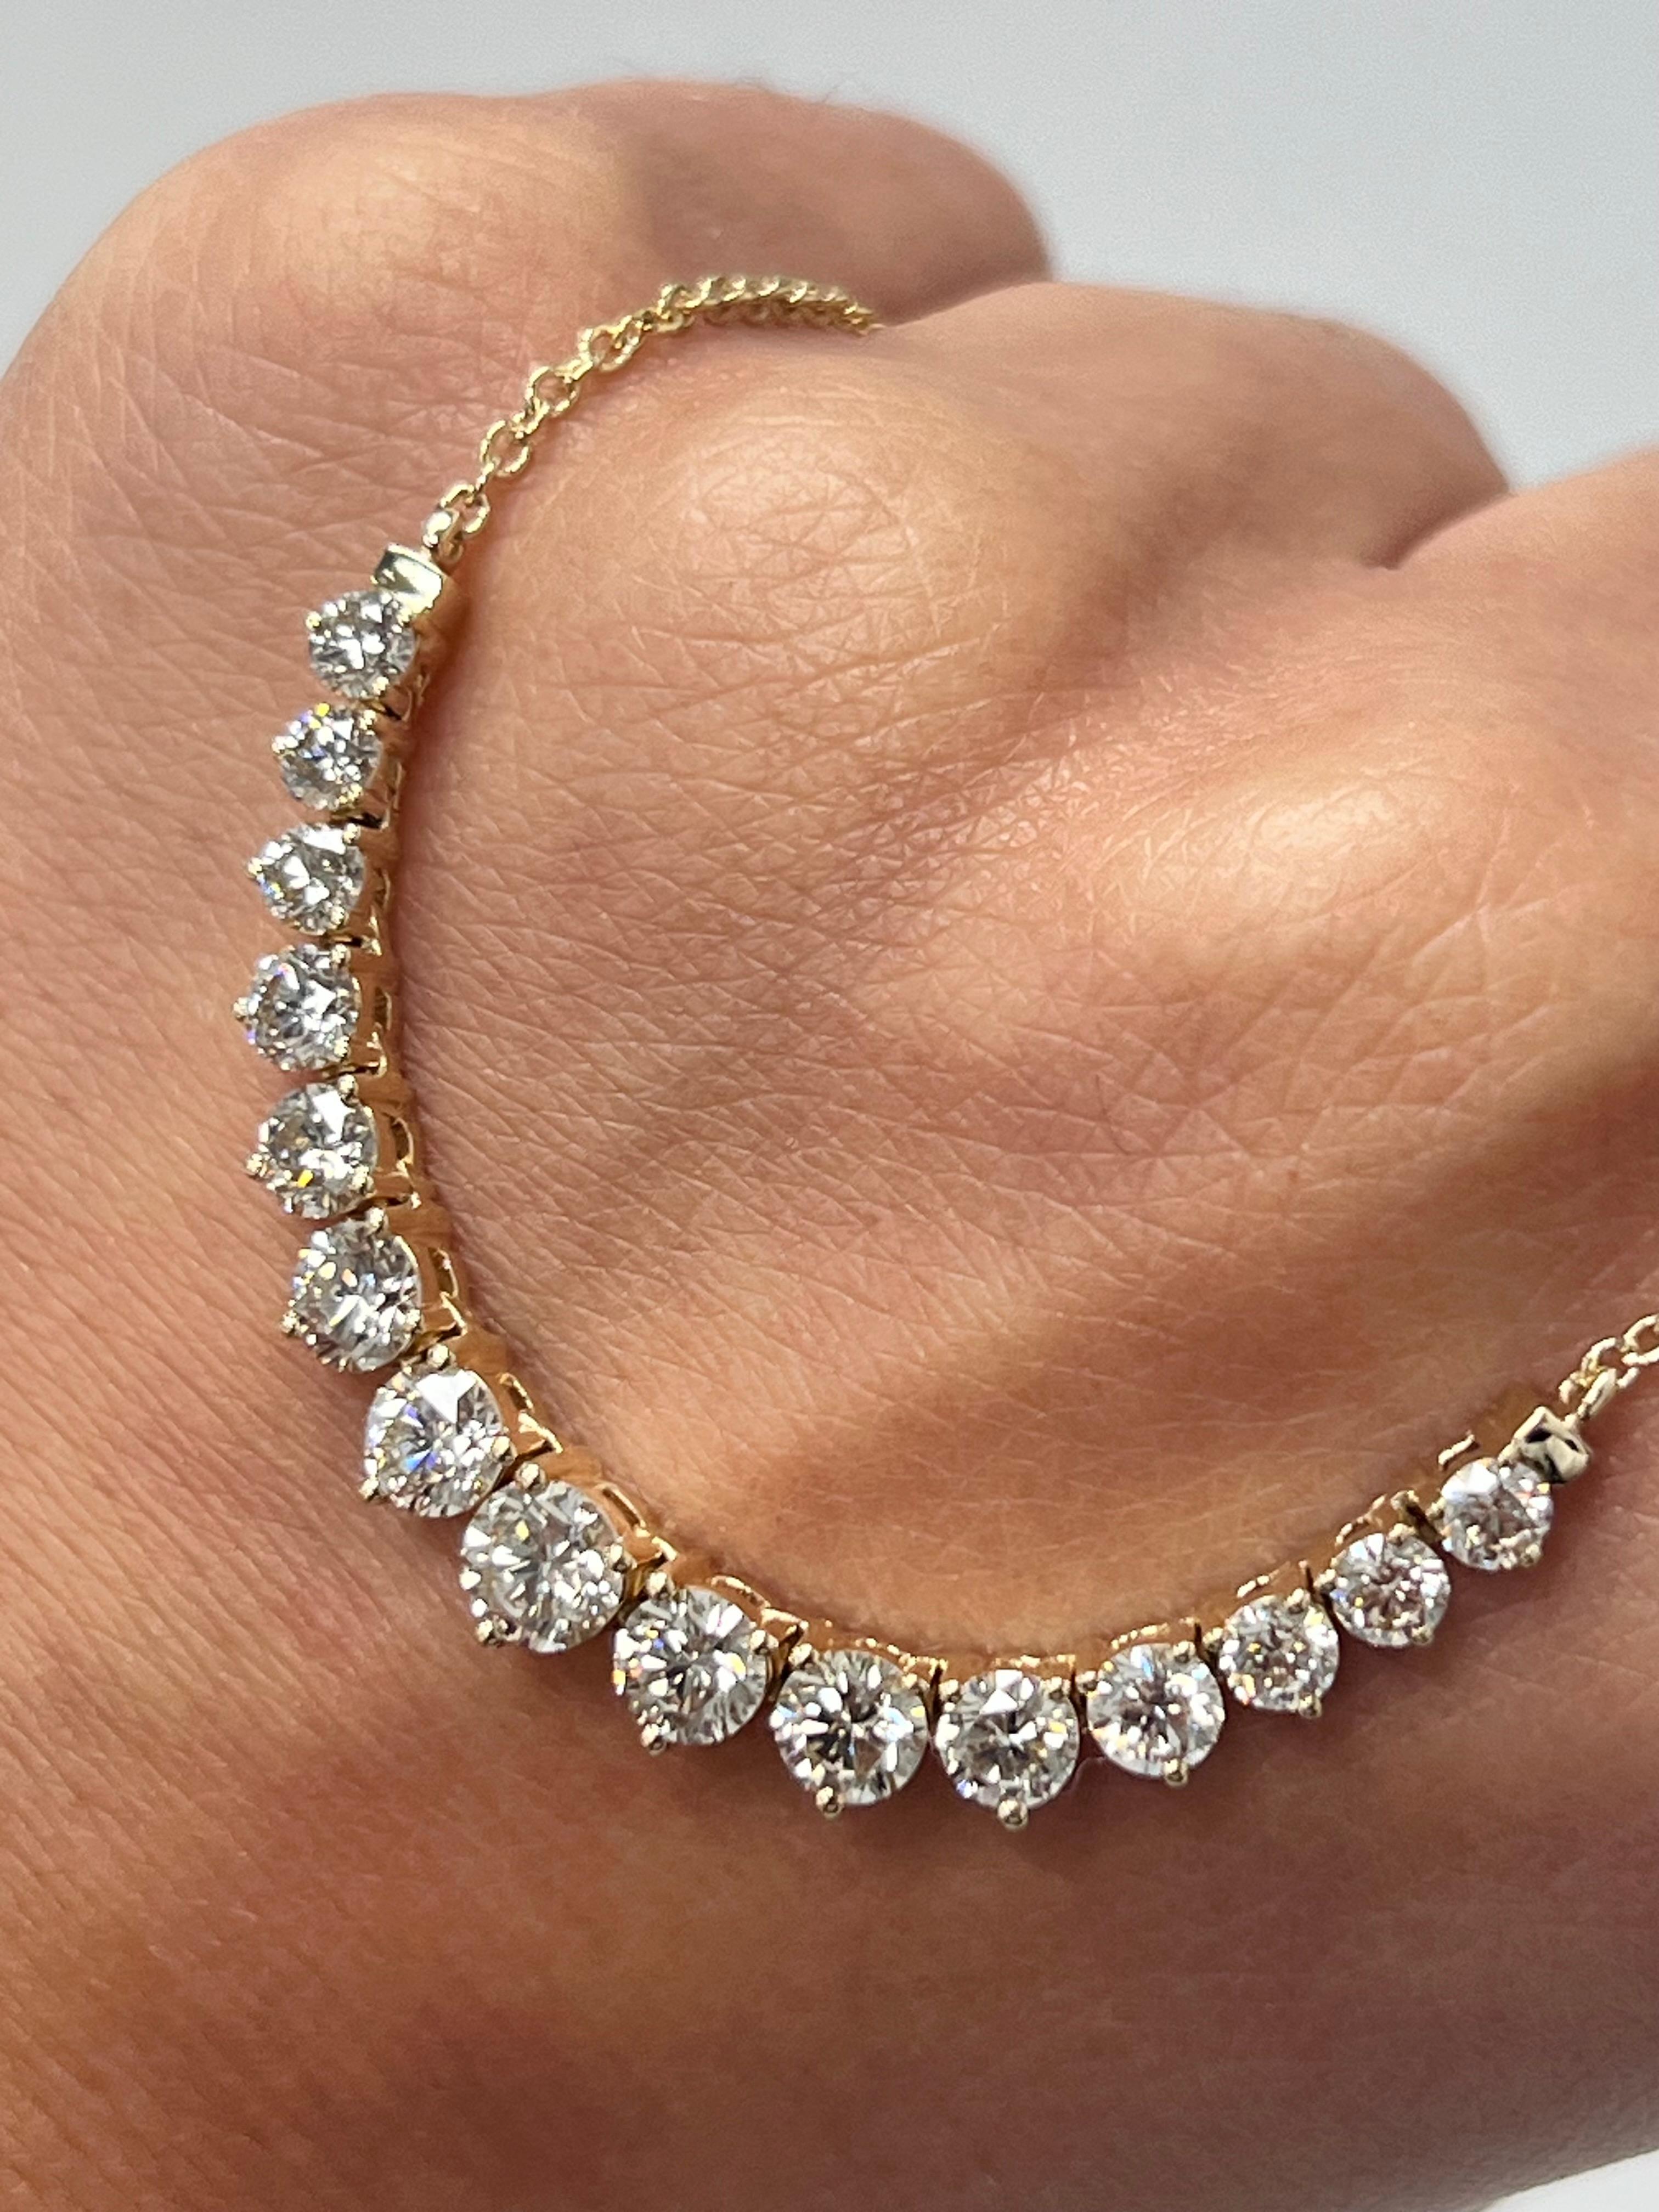 With this exquisite single-row yellow gold diamond necklace, style and glamour are in the spotlight. This 14-karat necklace is made from a total of 17 round diamonds totaling 3.2 carats, all in SI1-SI2, GH color. This classic look is timeless and is